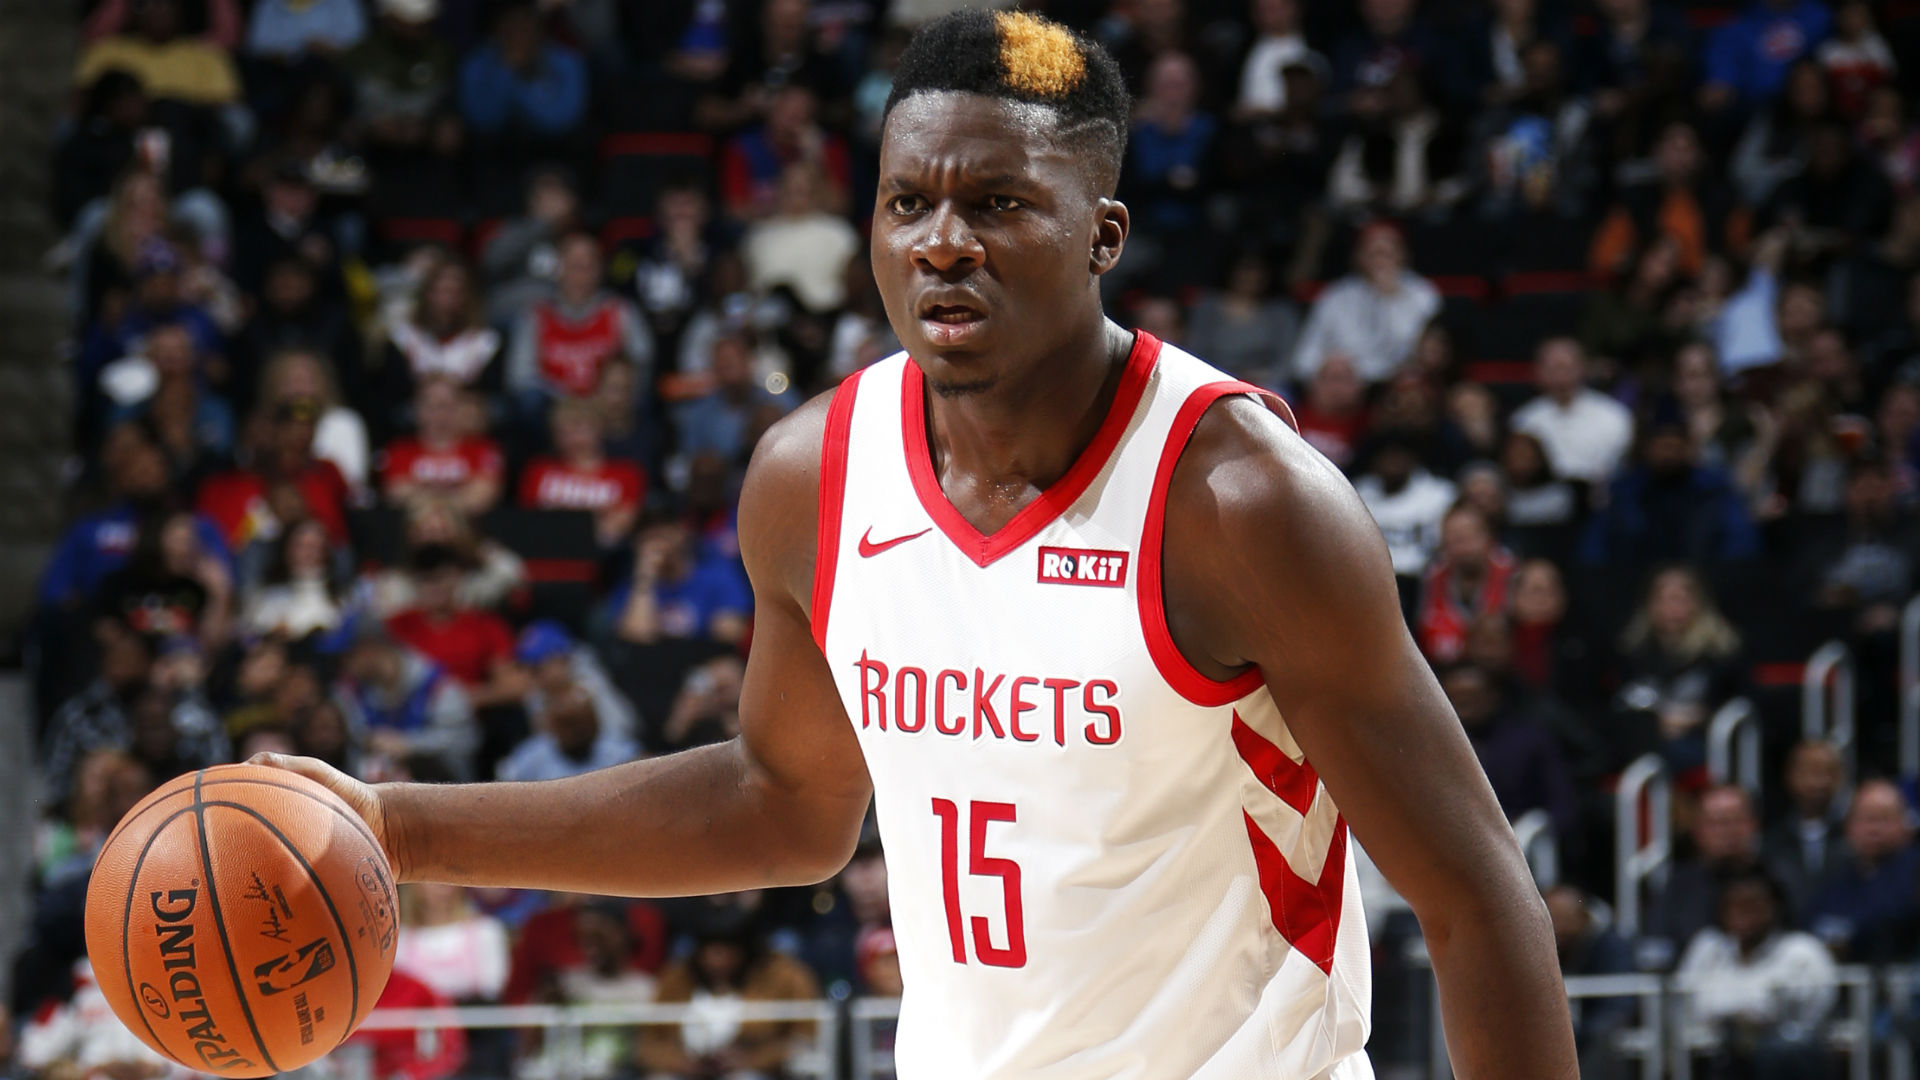 Report: Rockets centre Clint Capela to miss 4-6 weeks with thumb injury | NBA.com ...1920 x 1080